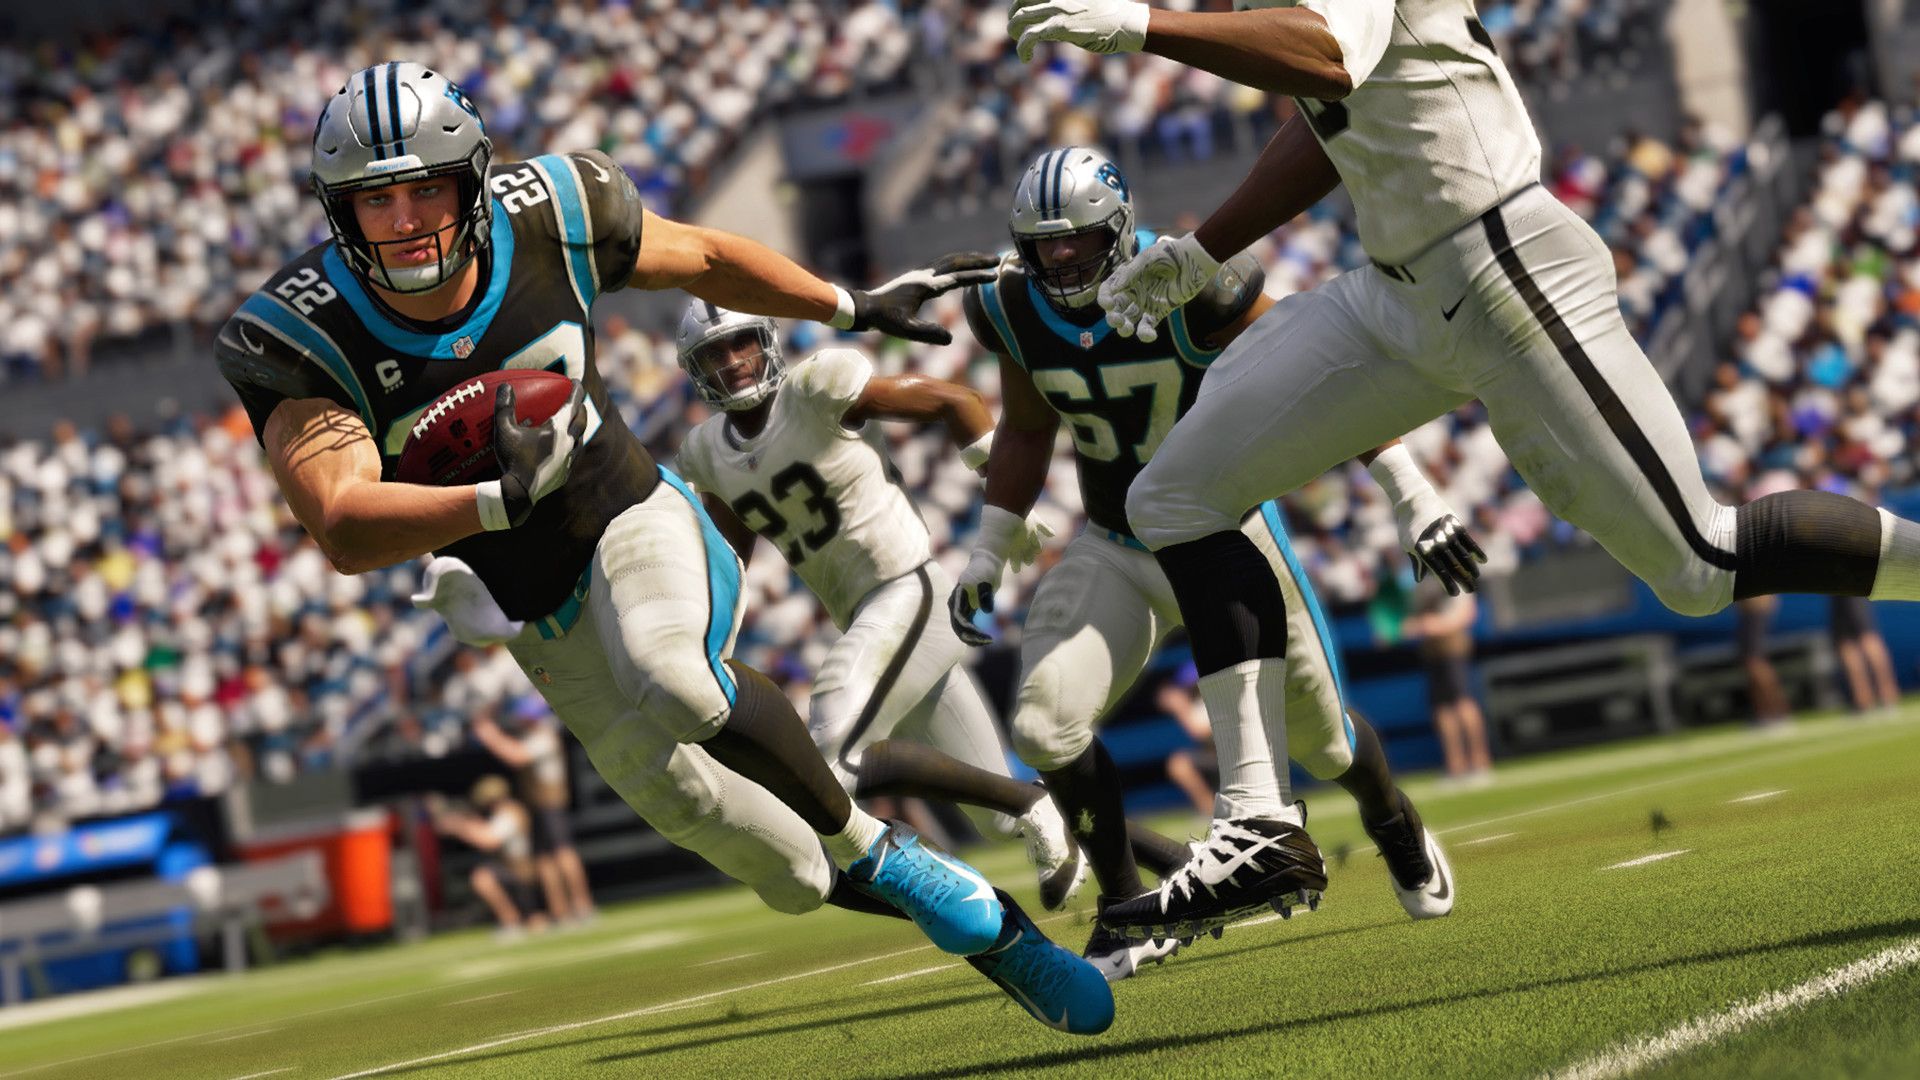 Madden NFL 21 is coming to PC (Origin and Steam), PS4 and XB1